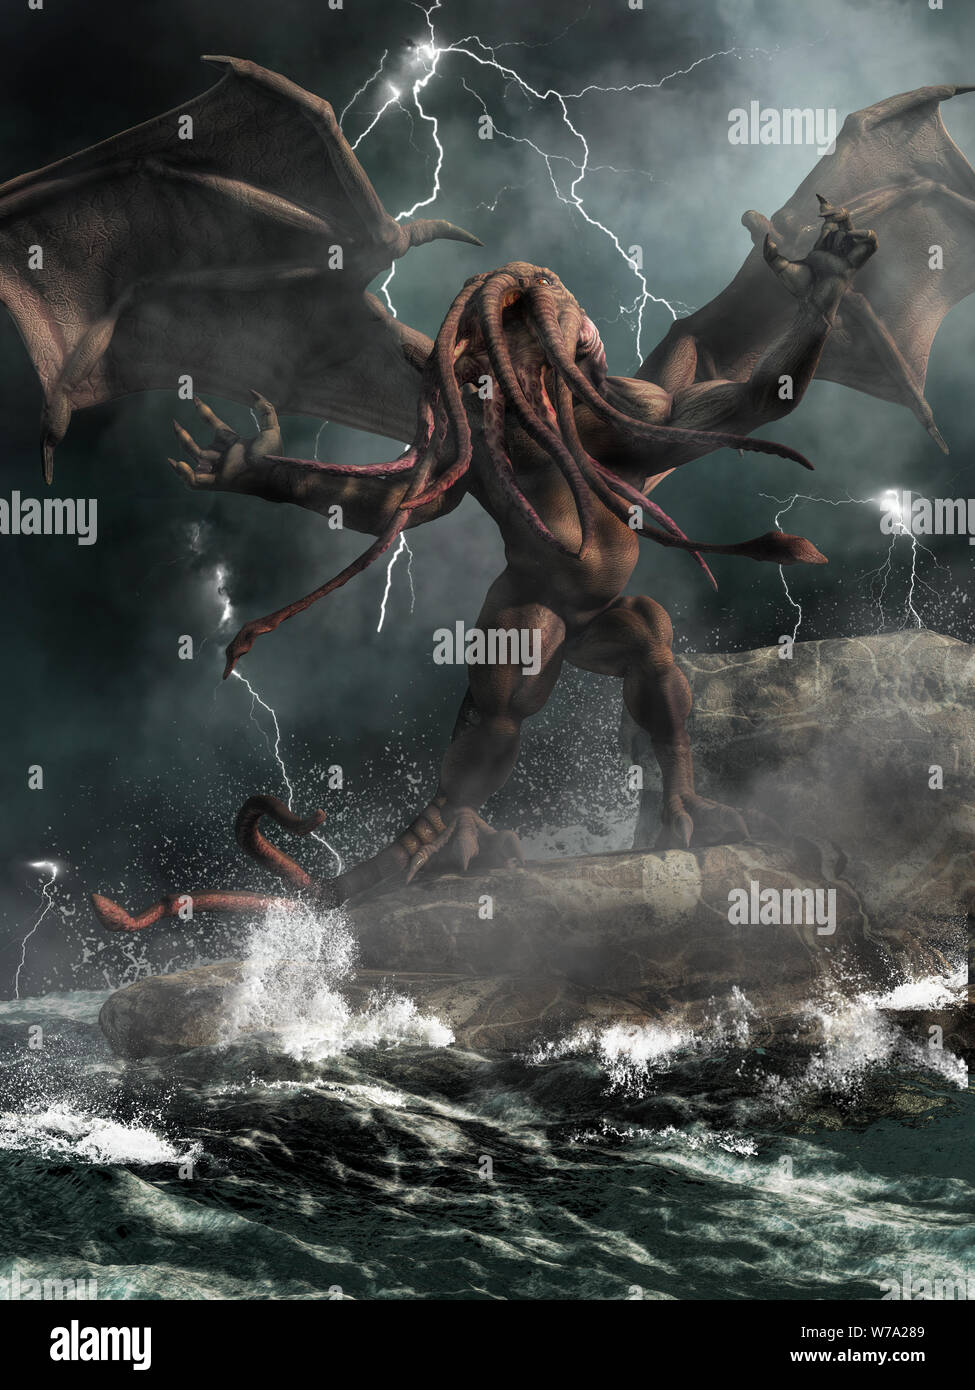 Cthulhu, the great old one of H. P. Lovecraft's mythos stands on rocks in a stormy sea highlighted by lightning. 3D Rendering Stock Photo